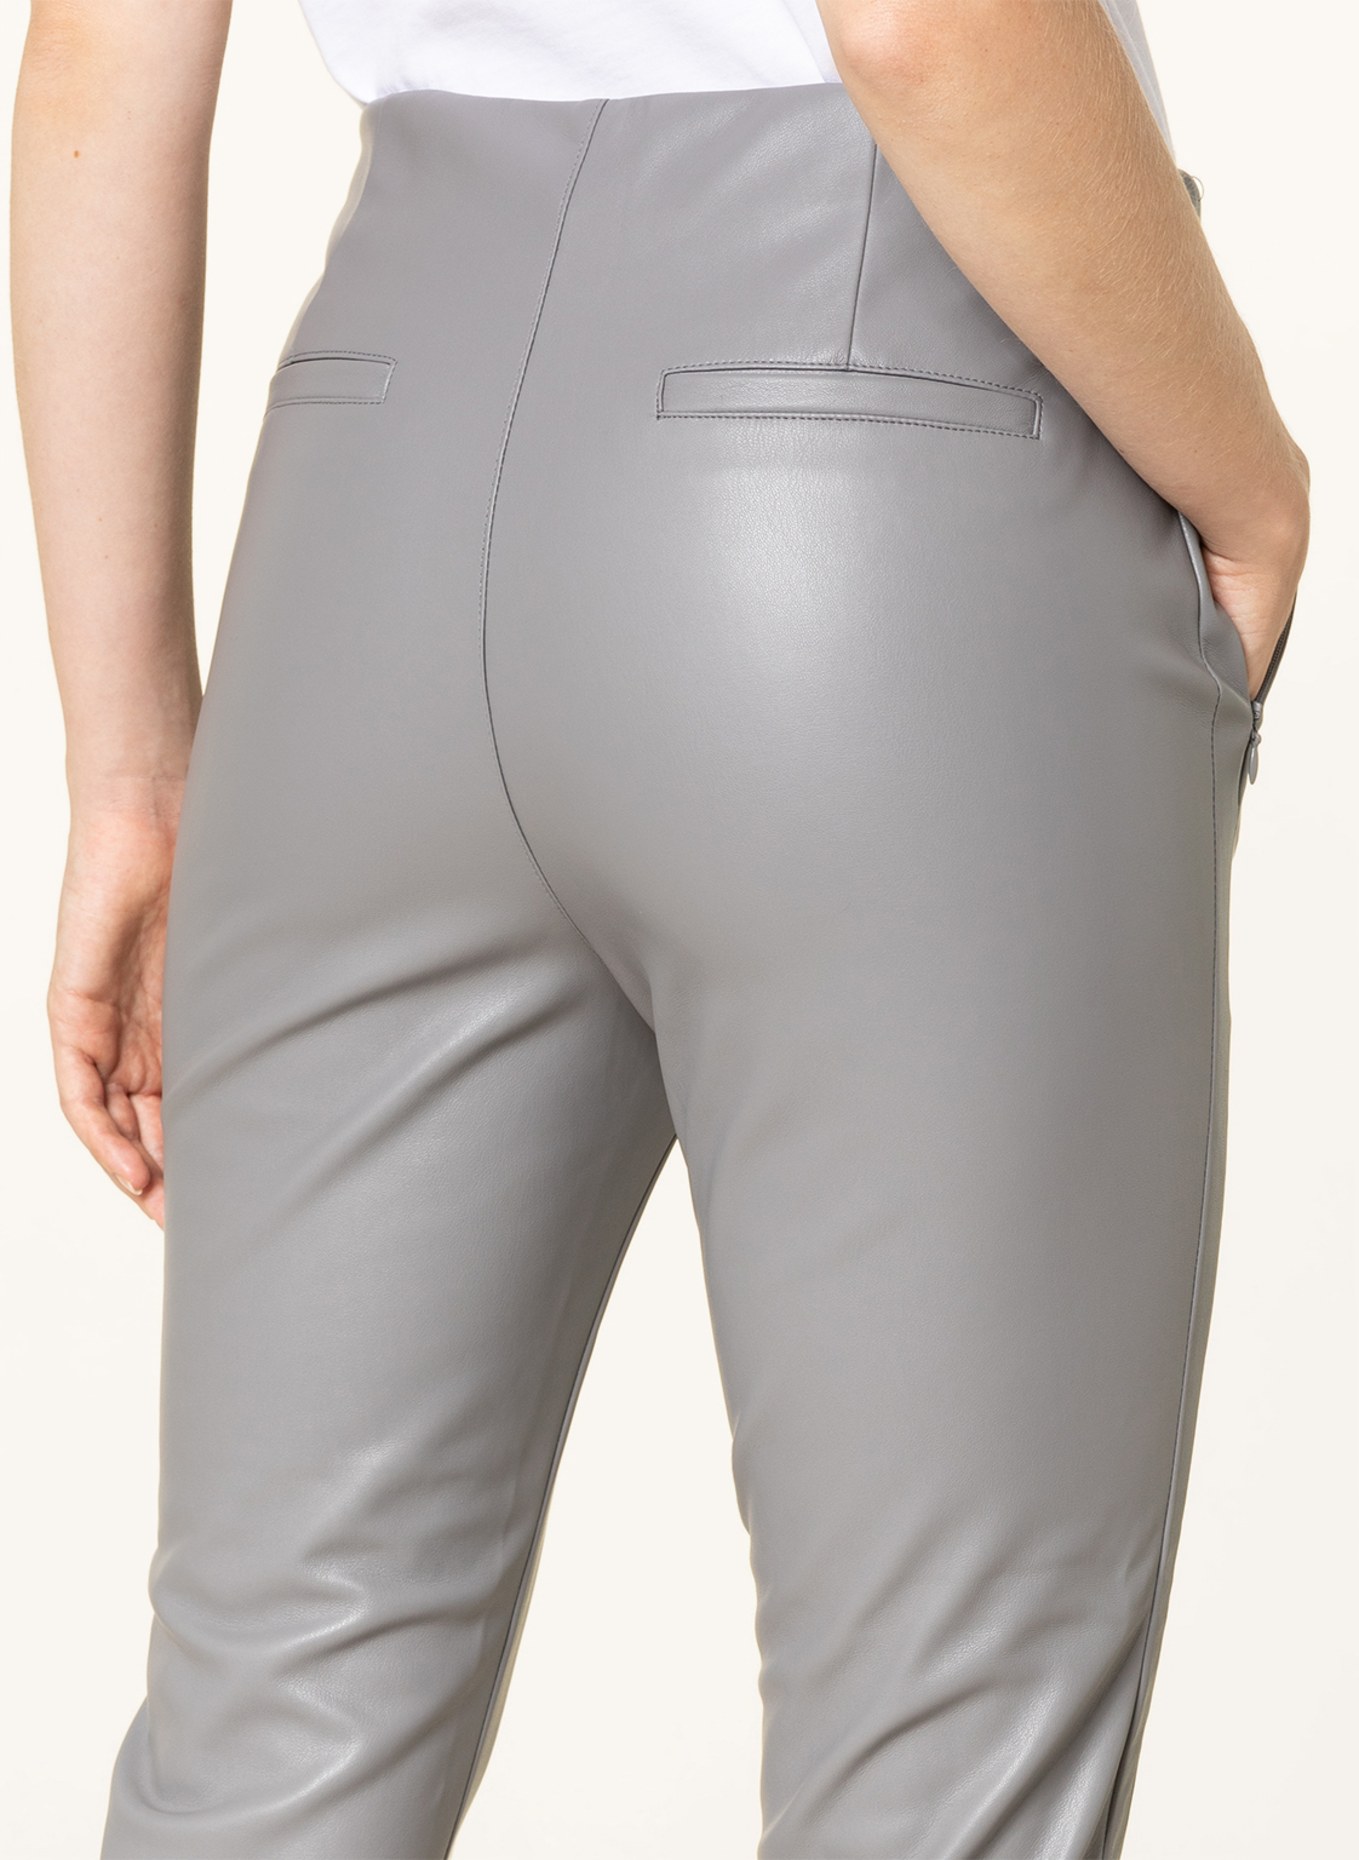 monari Trousers in leather look, Color: GRAY (Image 5)